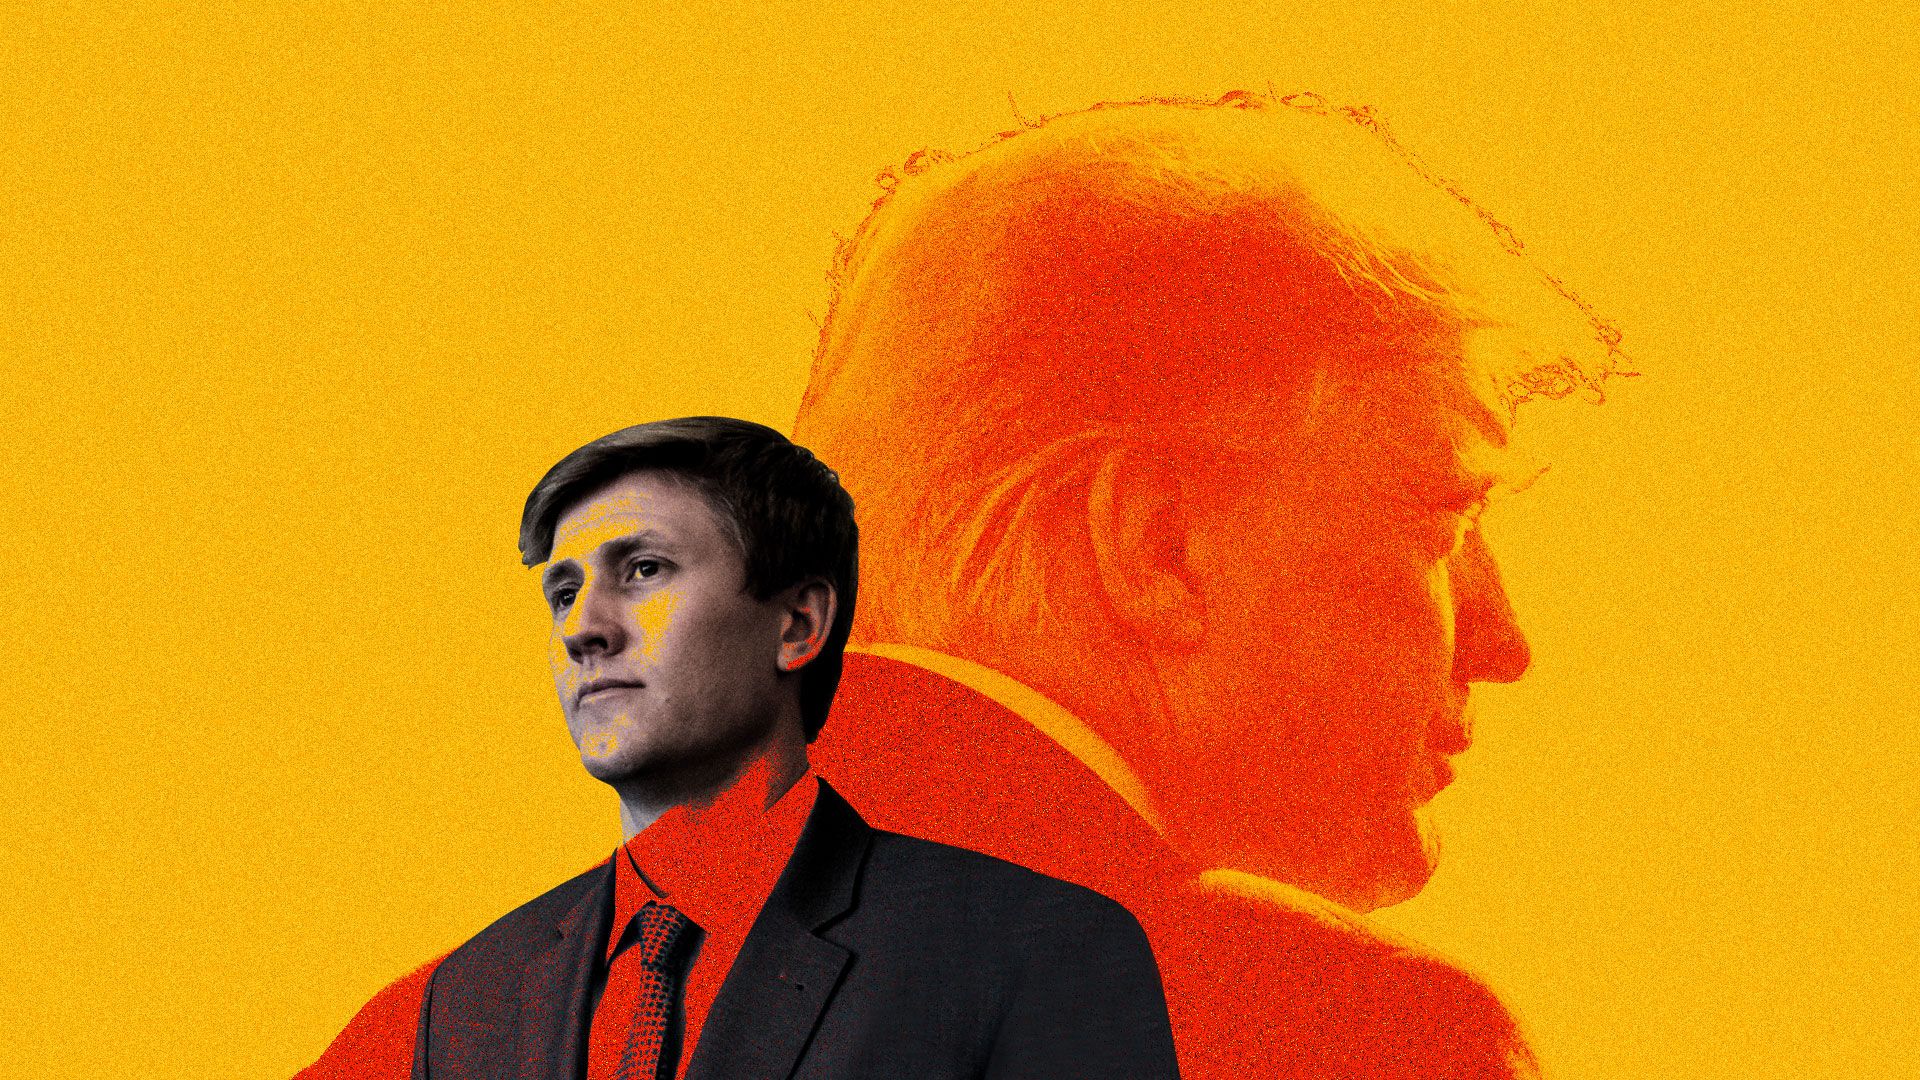 This is an illustration of Nick Ayers, Mike Pence's chief of staff